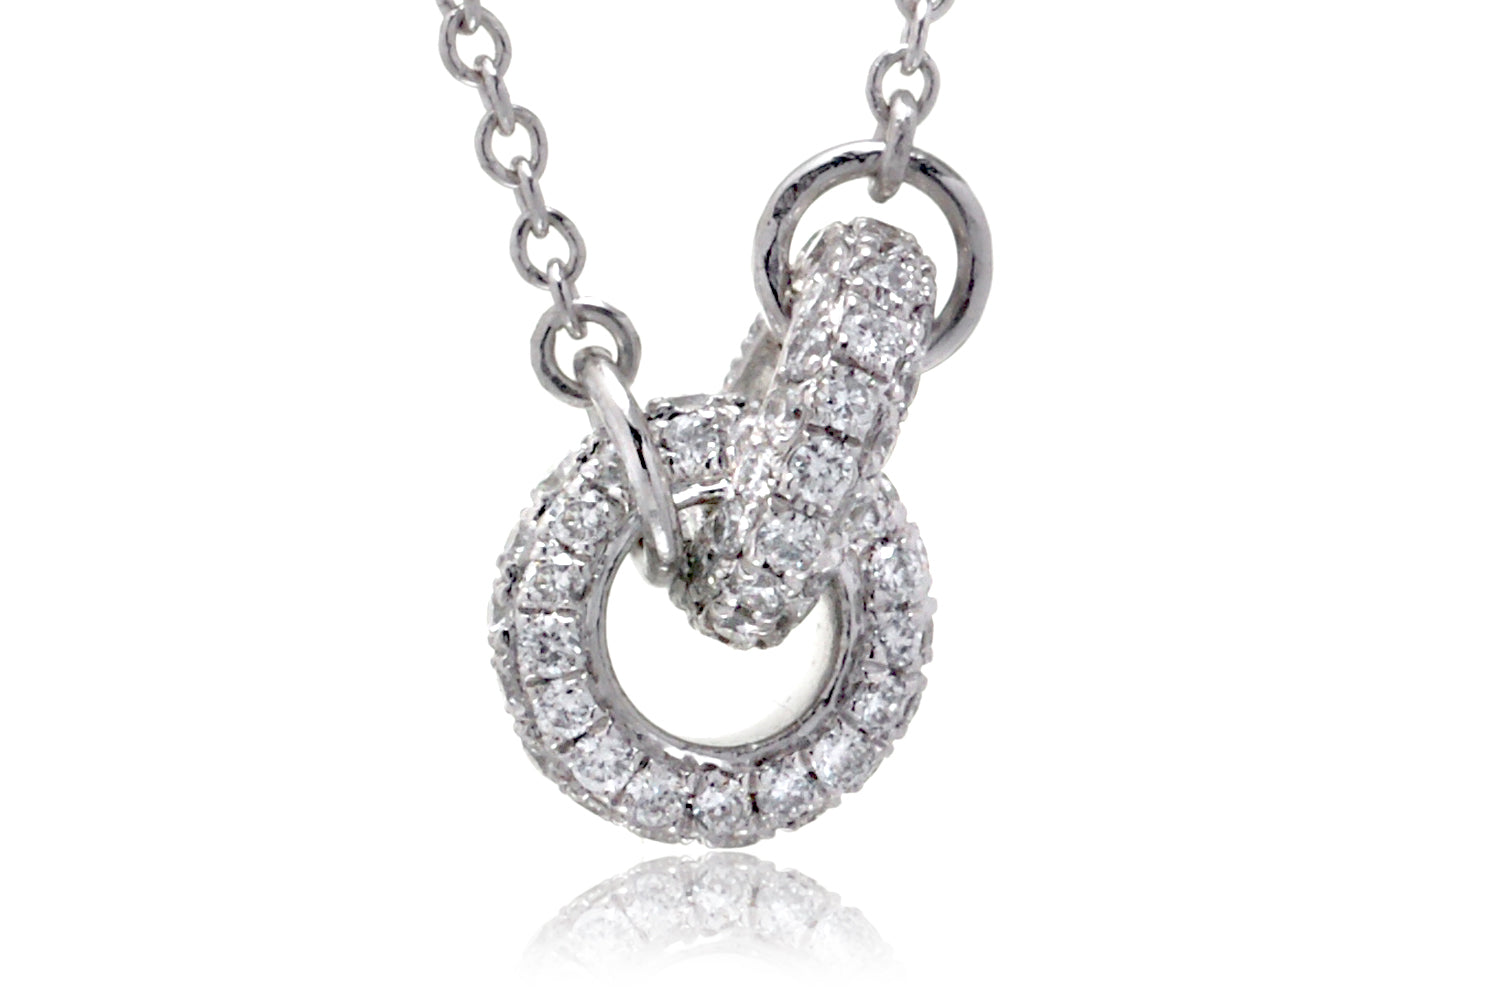 The Forever Linked Diamond Circle Necklace